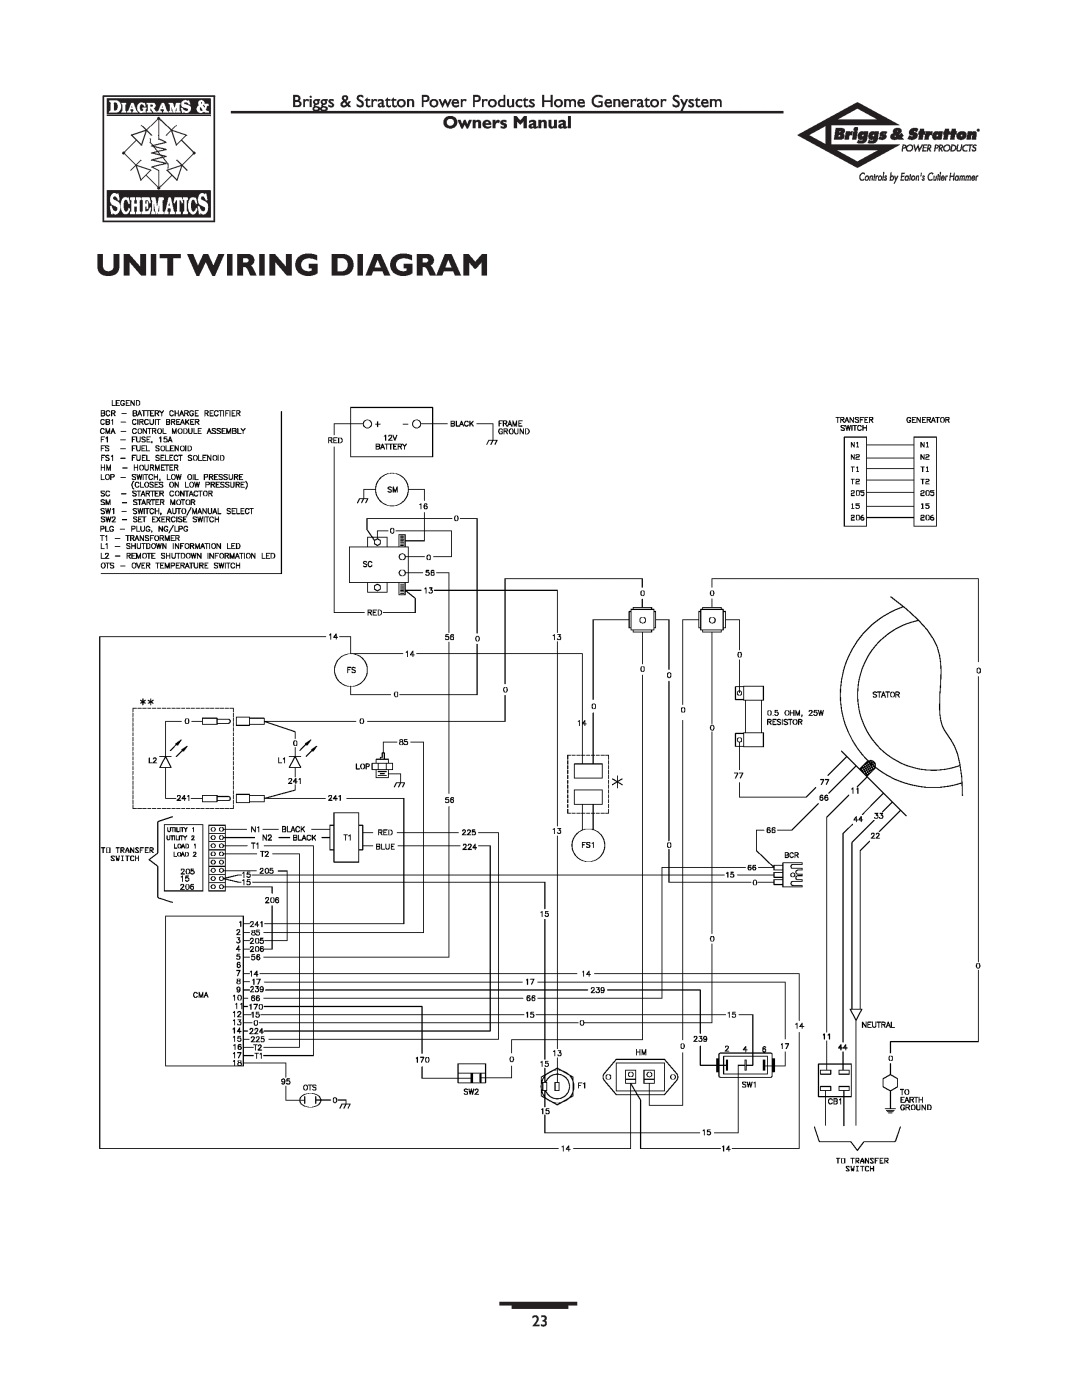 Briggs & Stratton 190839GS owner manual Unit Wiring Diagram, Owners Manual 